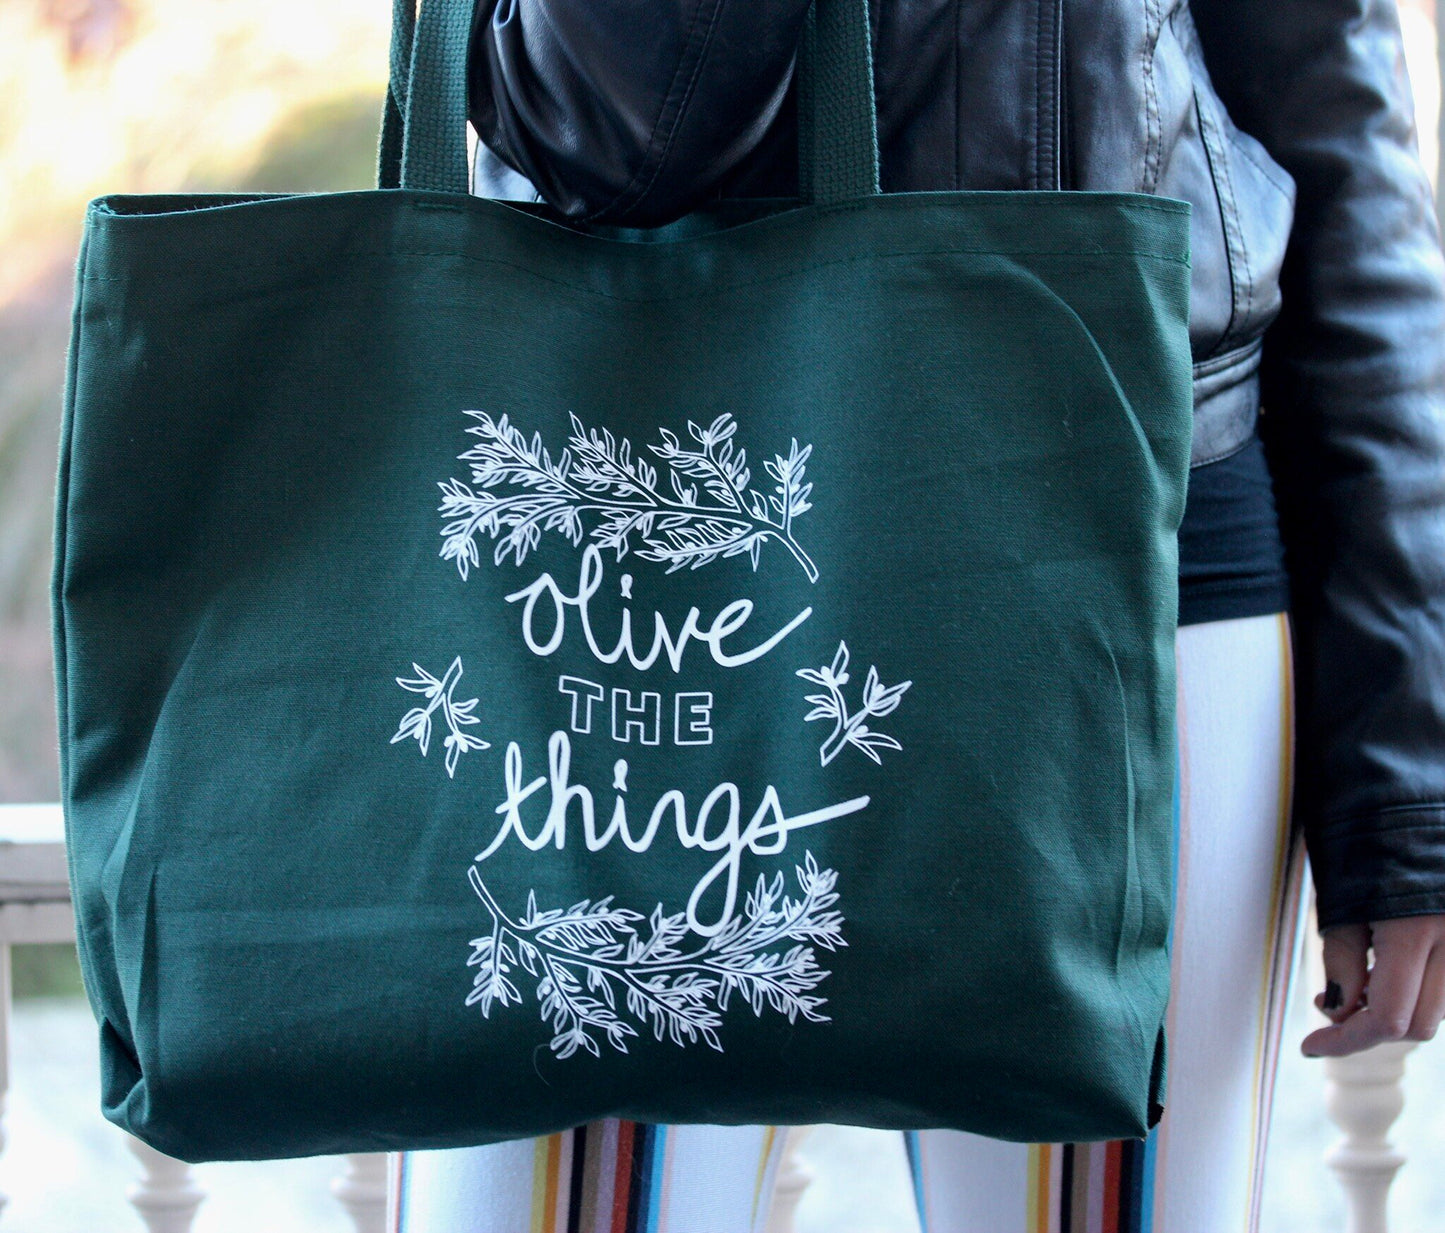 An extra large green canvas tote with the words "Olive the things" and olive branch designs